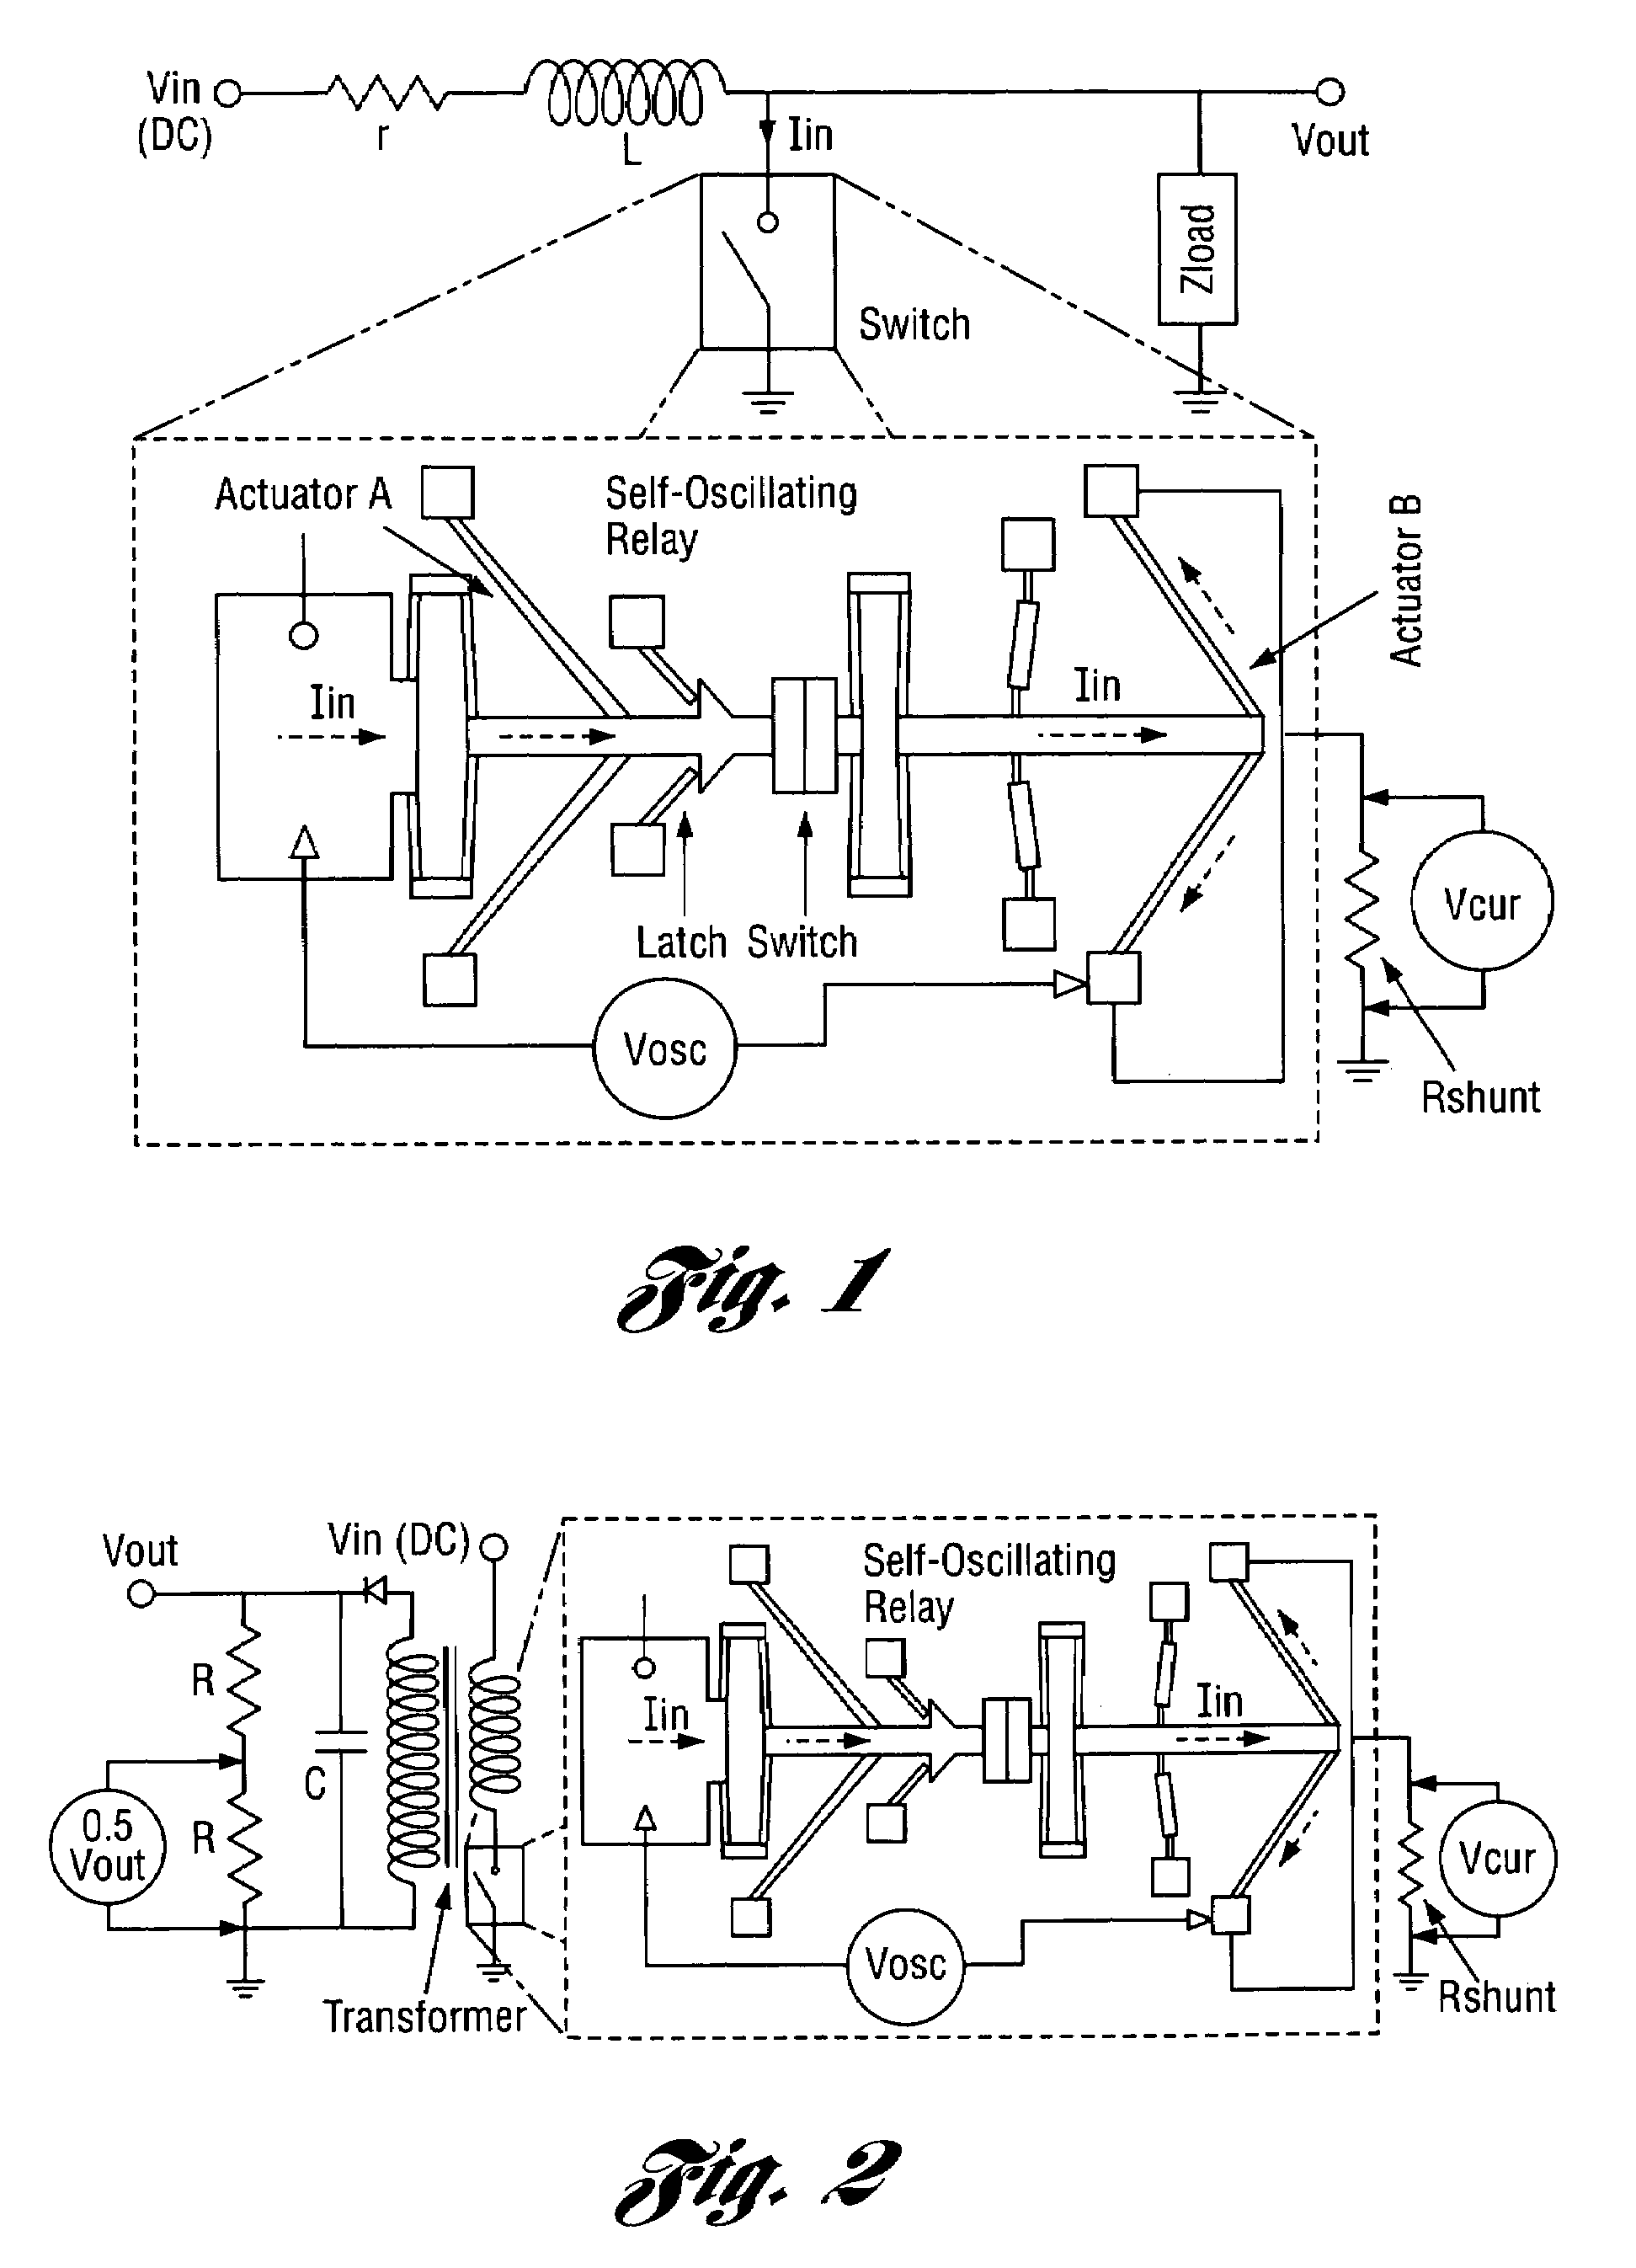 Mechanical self-reciprocating oscillator and mechanism and a method for establishing and maintaining regular back and forth movement of a micromachined device without the aid of any electronic components